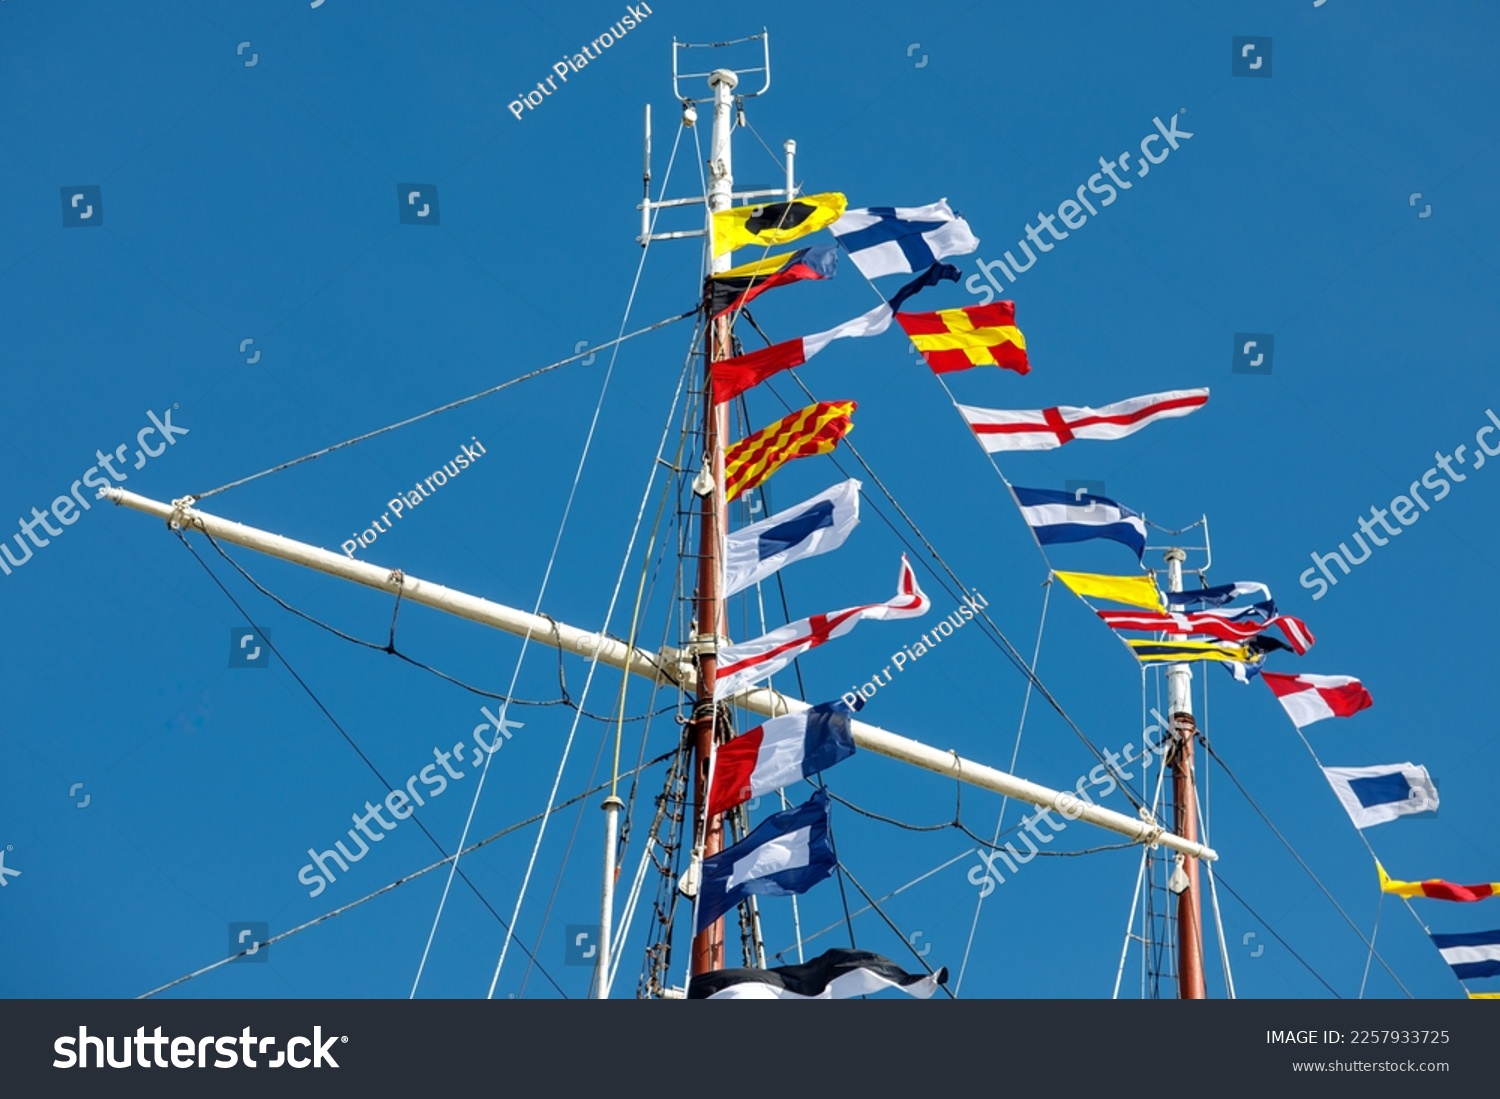 International maritime signal flags on a flagpole and masts on a sailing ship with a blue sky in the background #2257933725